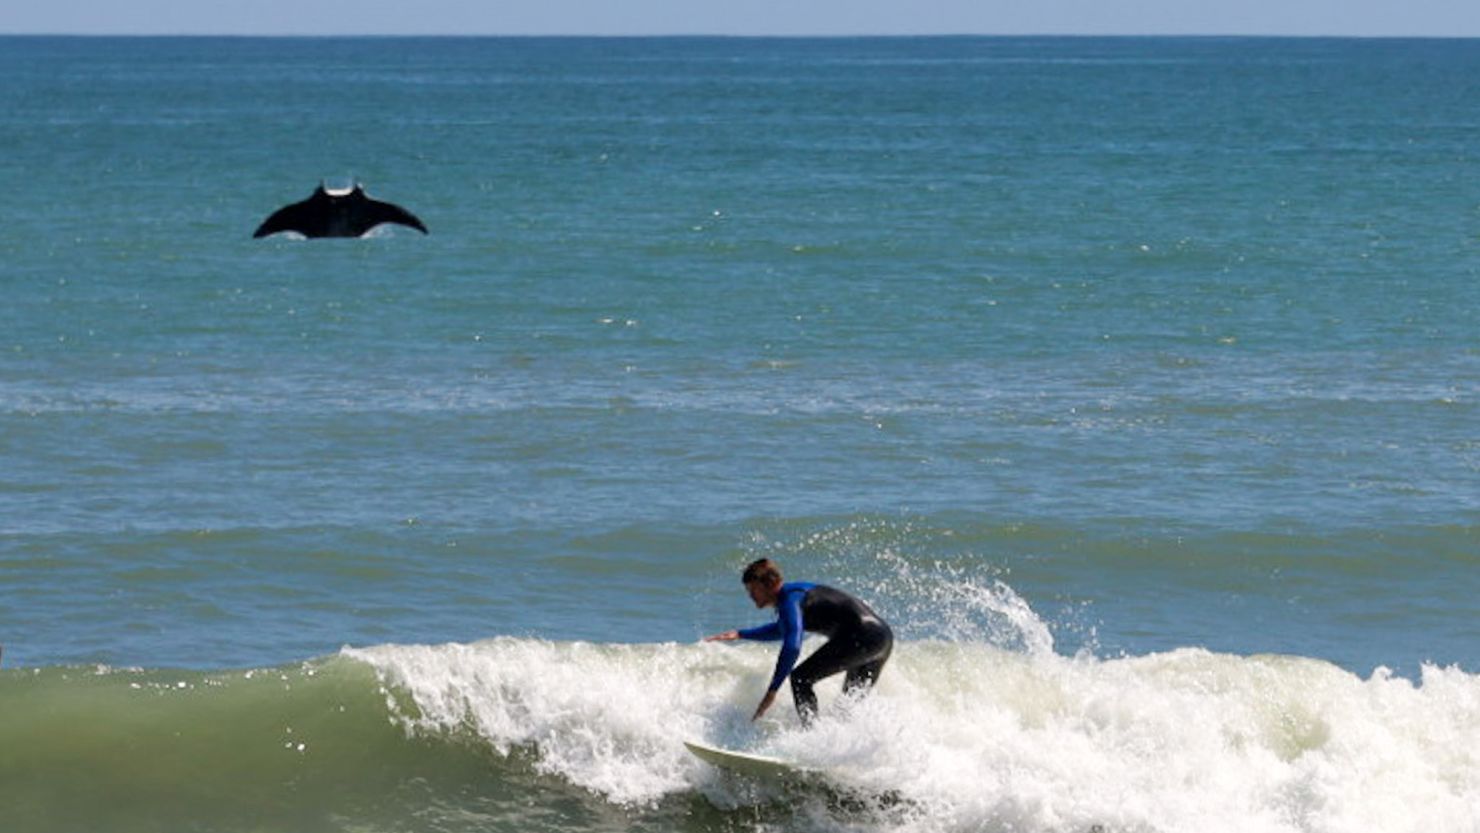 Rusty Escandell says he noticed a little splash while taking pictures of surfers in Satellite Beach, Florida, but he didn't know that a huge manta ray had jumped out of the water until he looked at the photos at home.